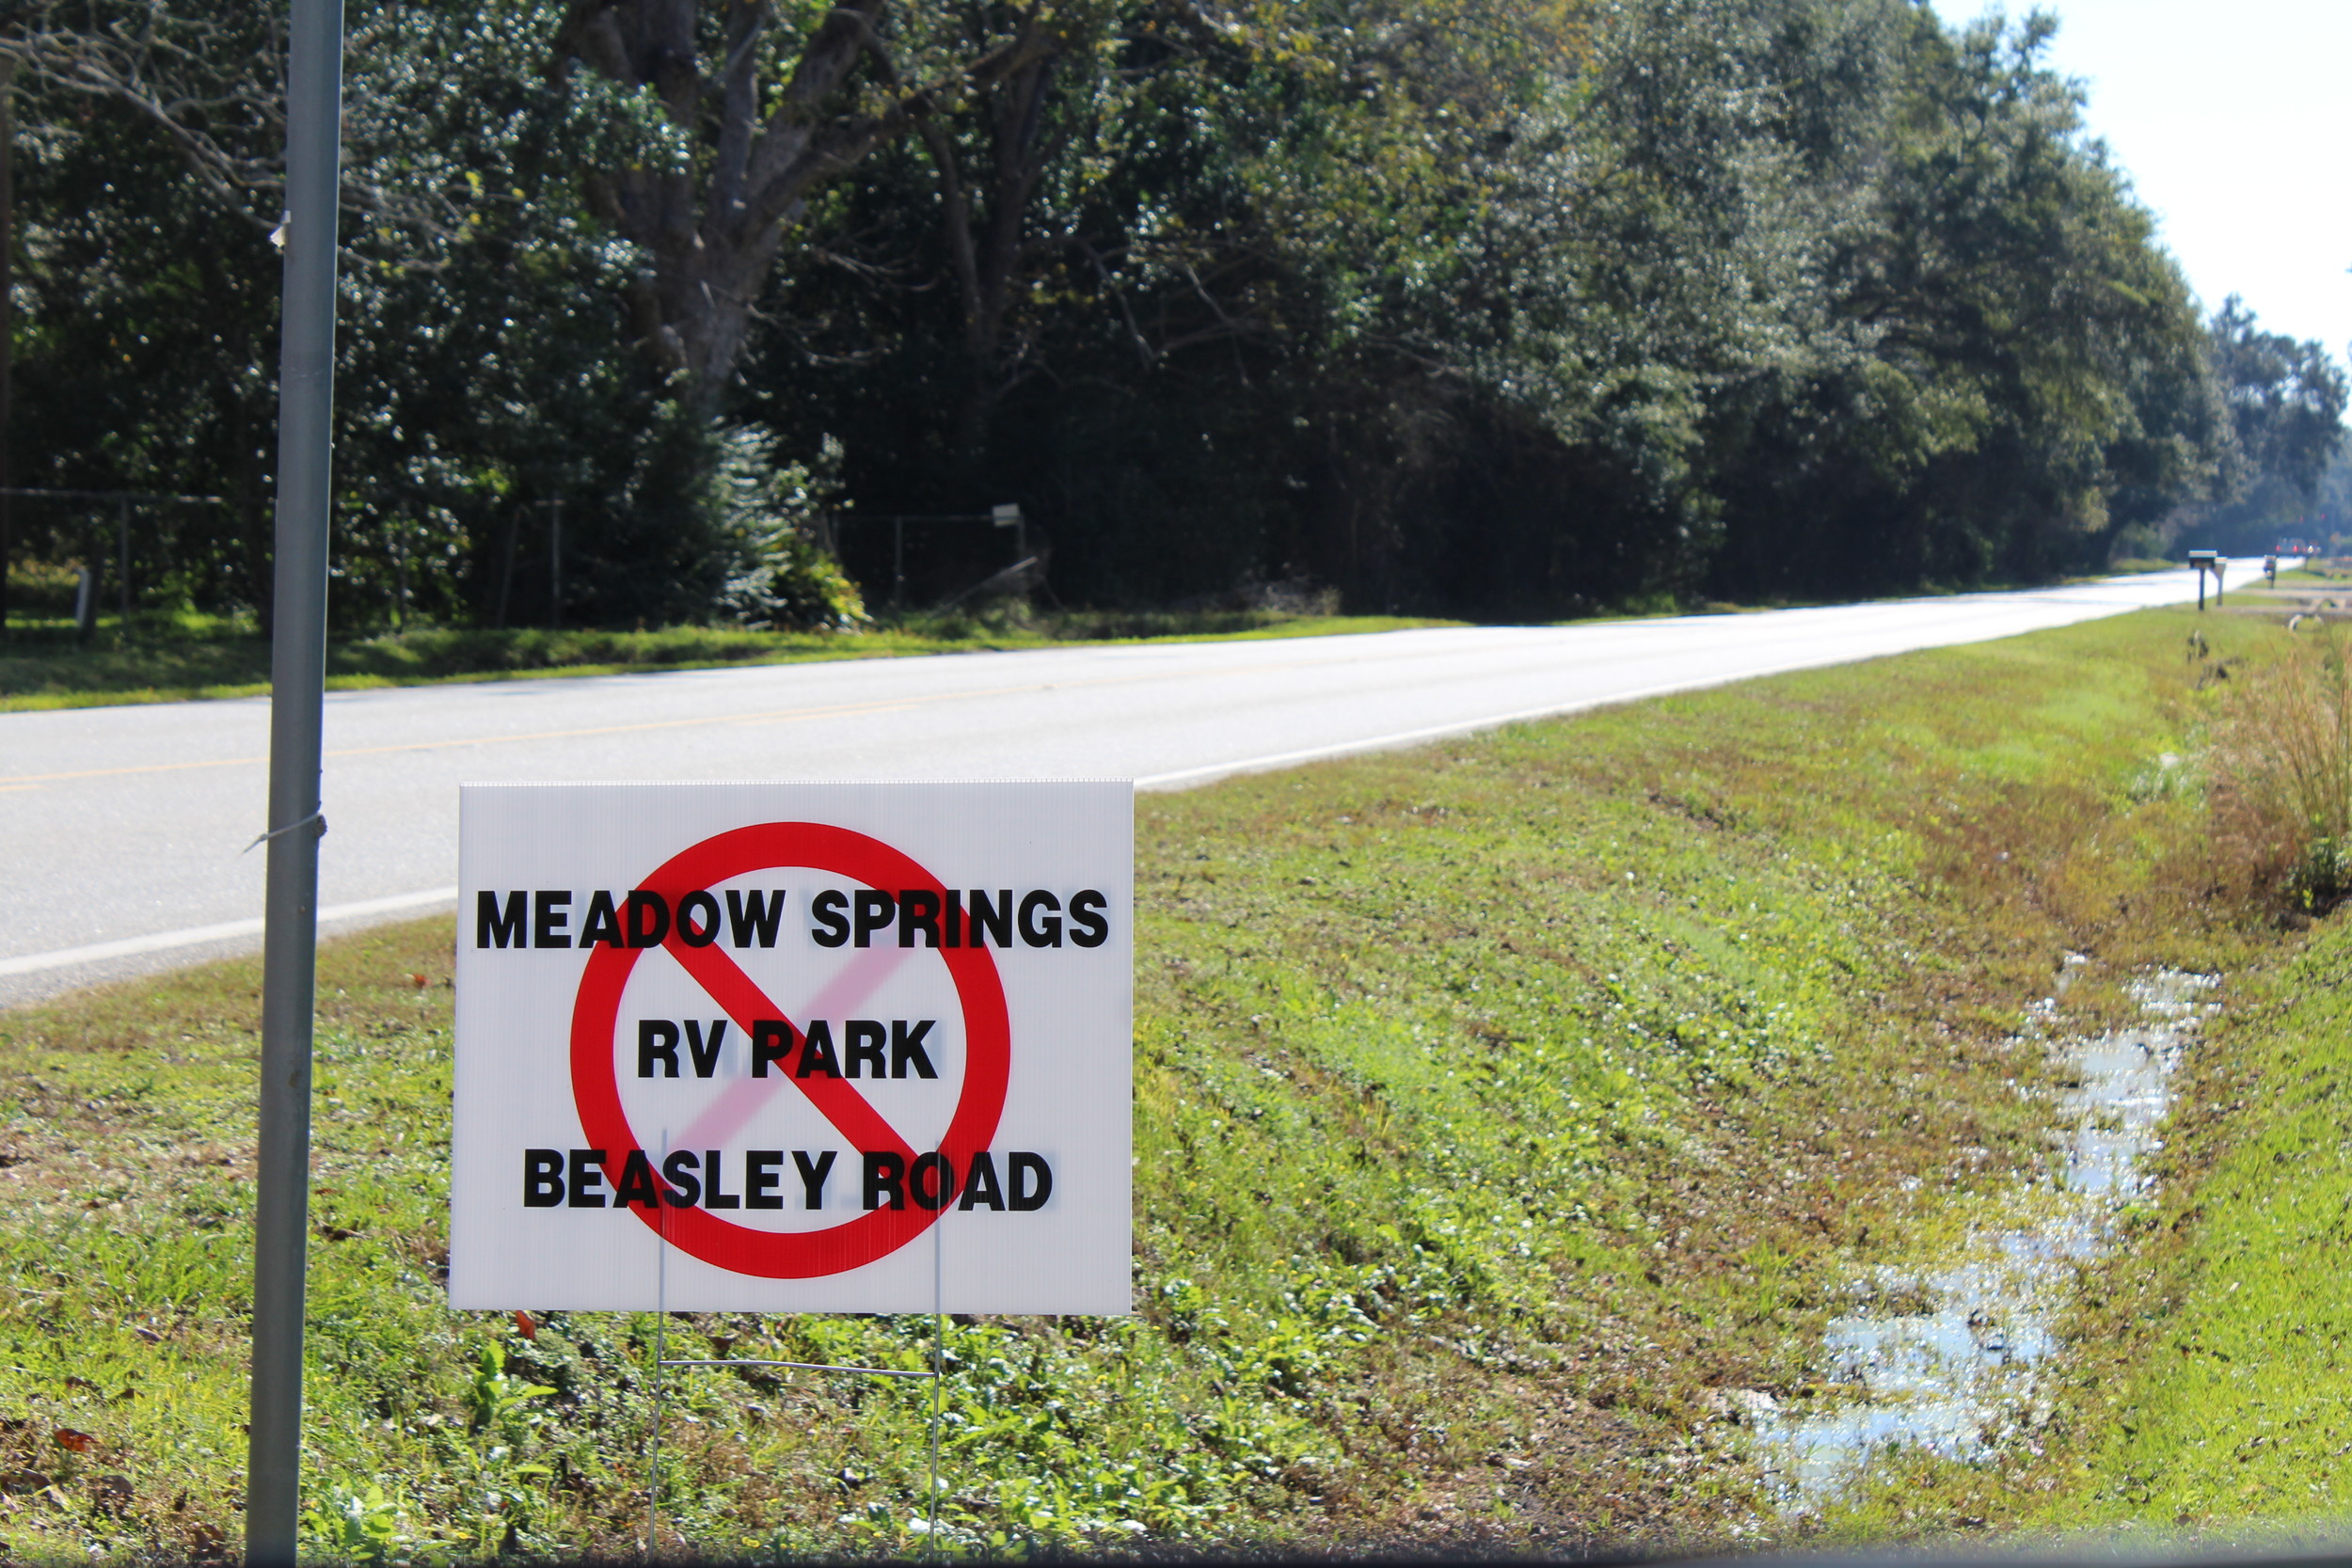 Signs protesting the proposed Meadow Springs RV Park have been placed along Beasley Road.